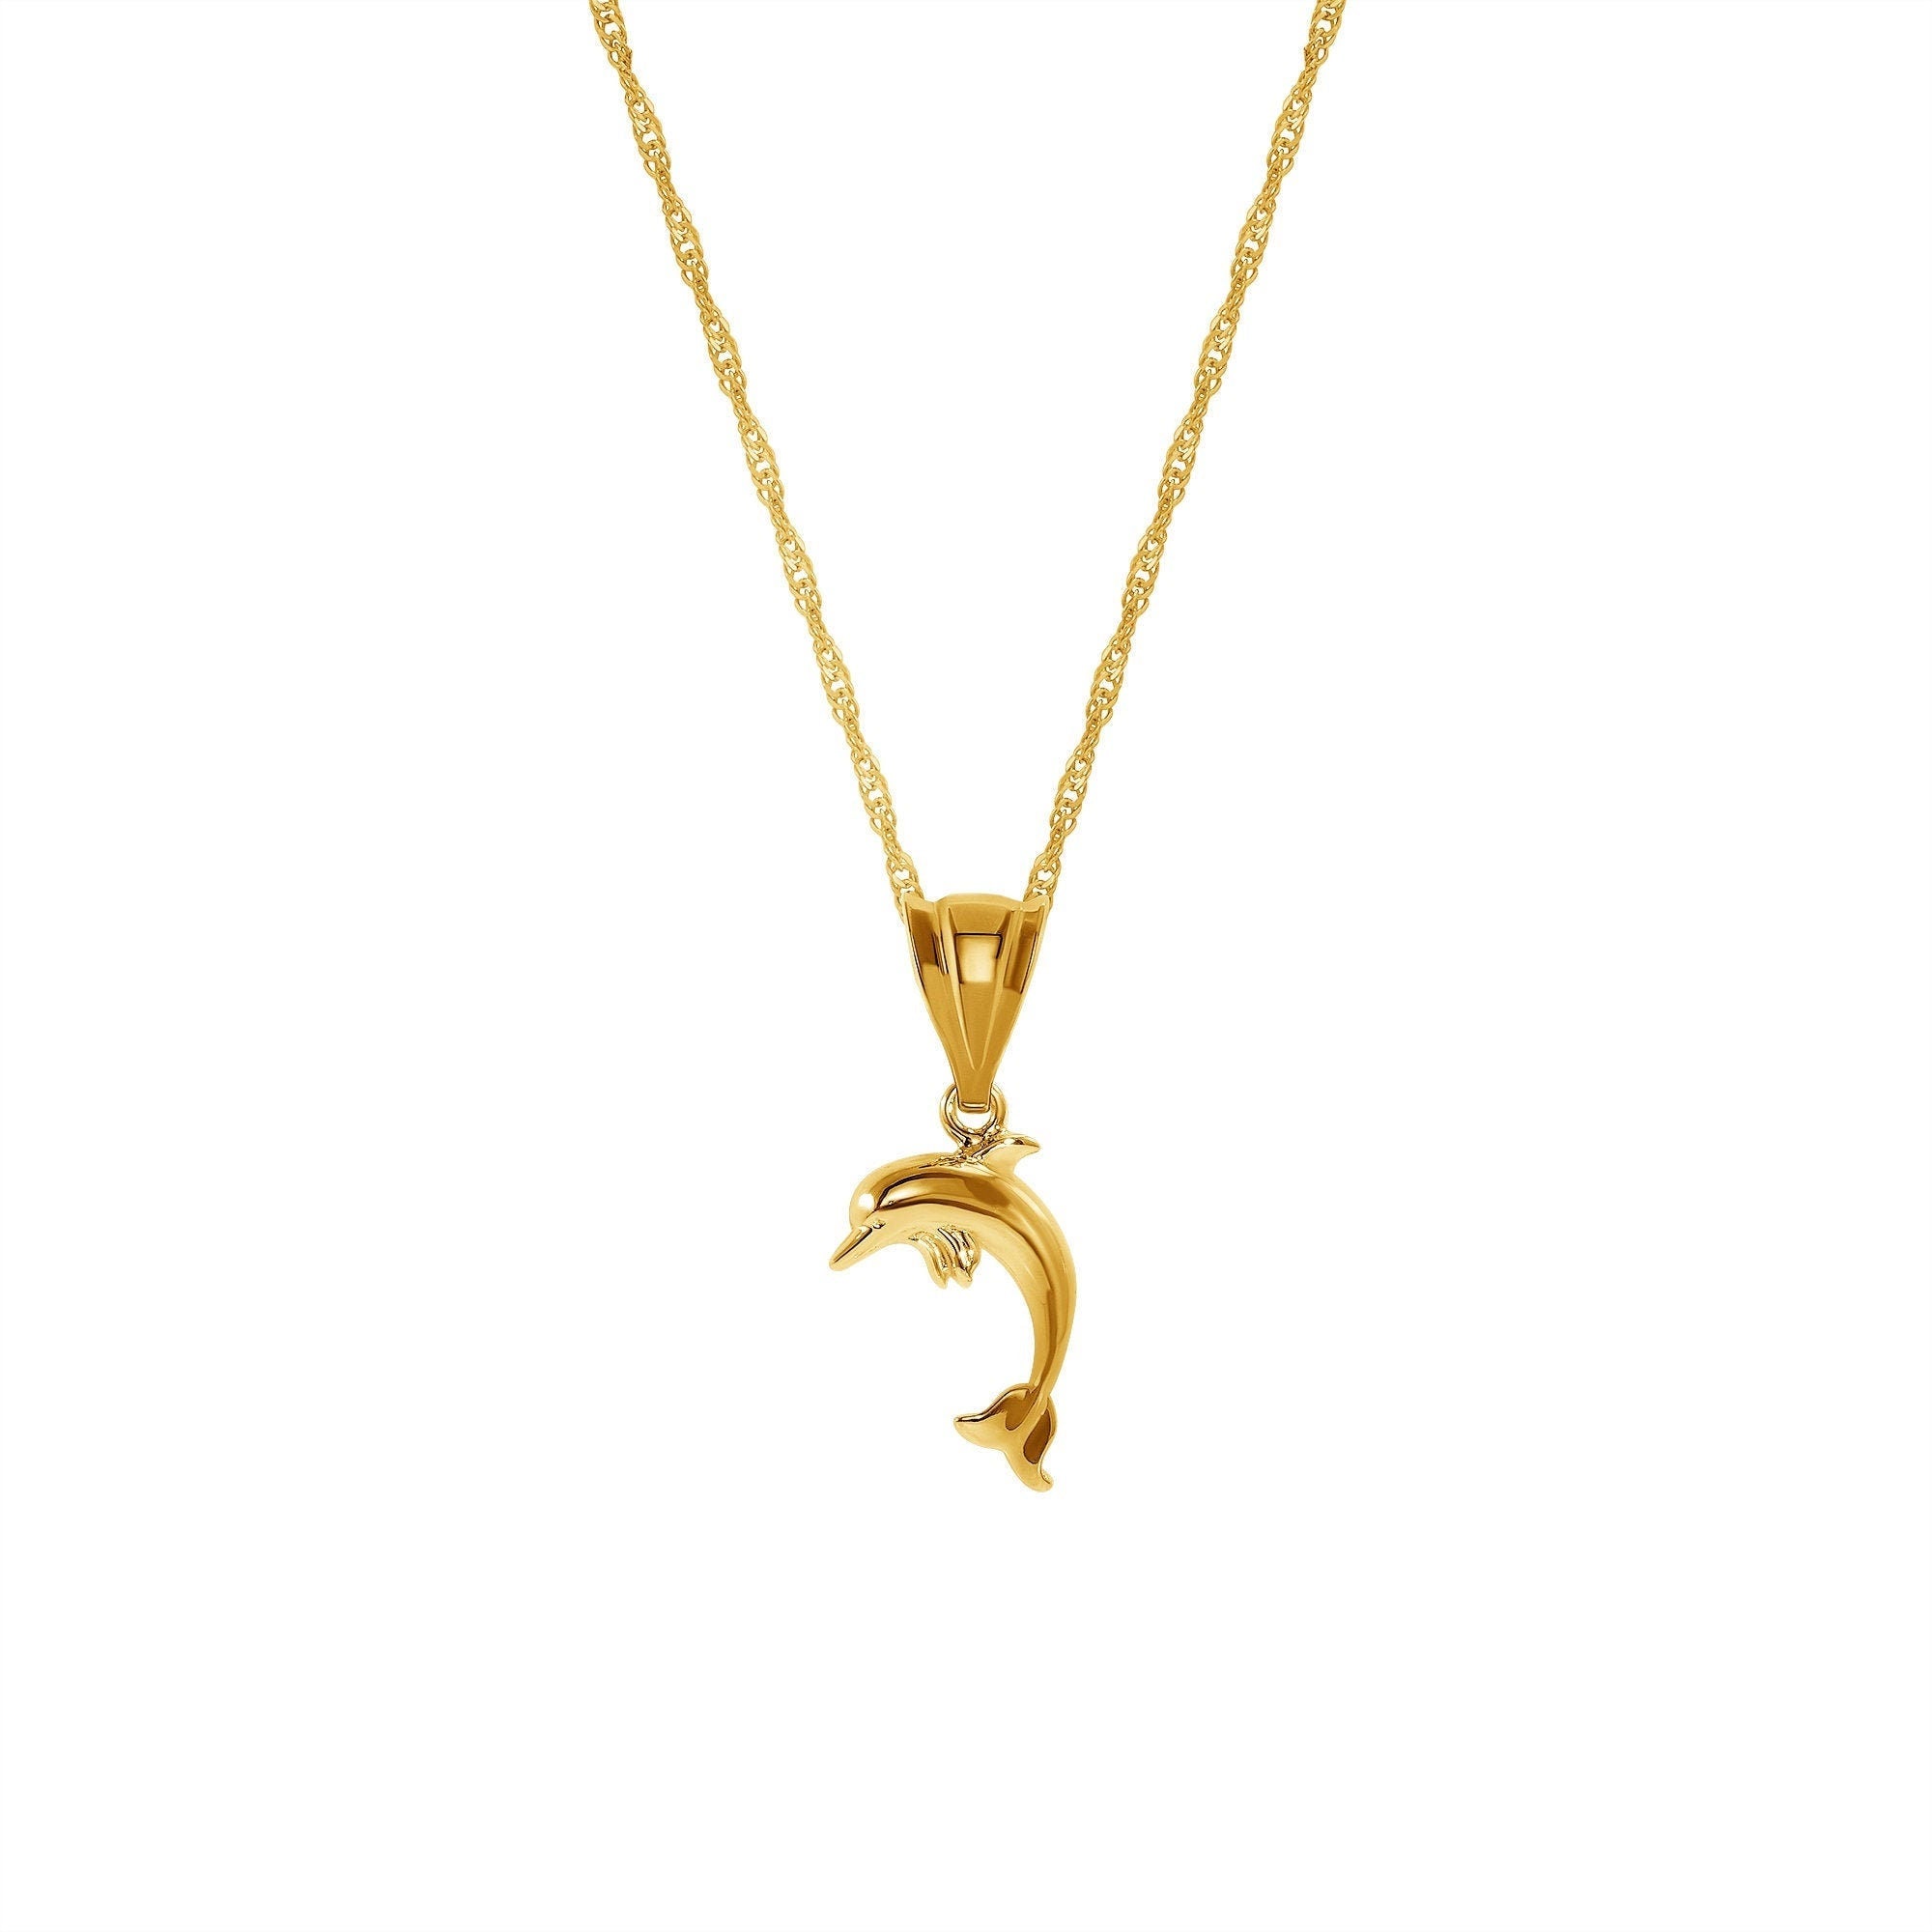 14k solid gold dolphin pendant on 18" solid gold chain